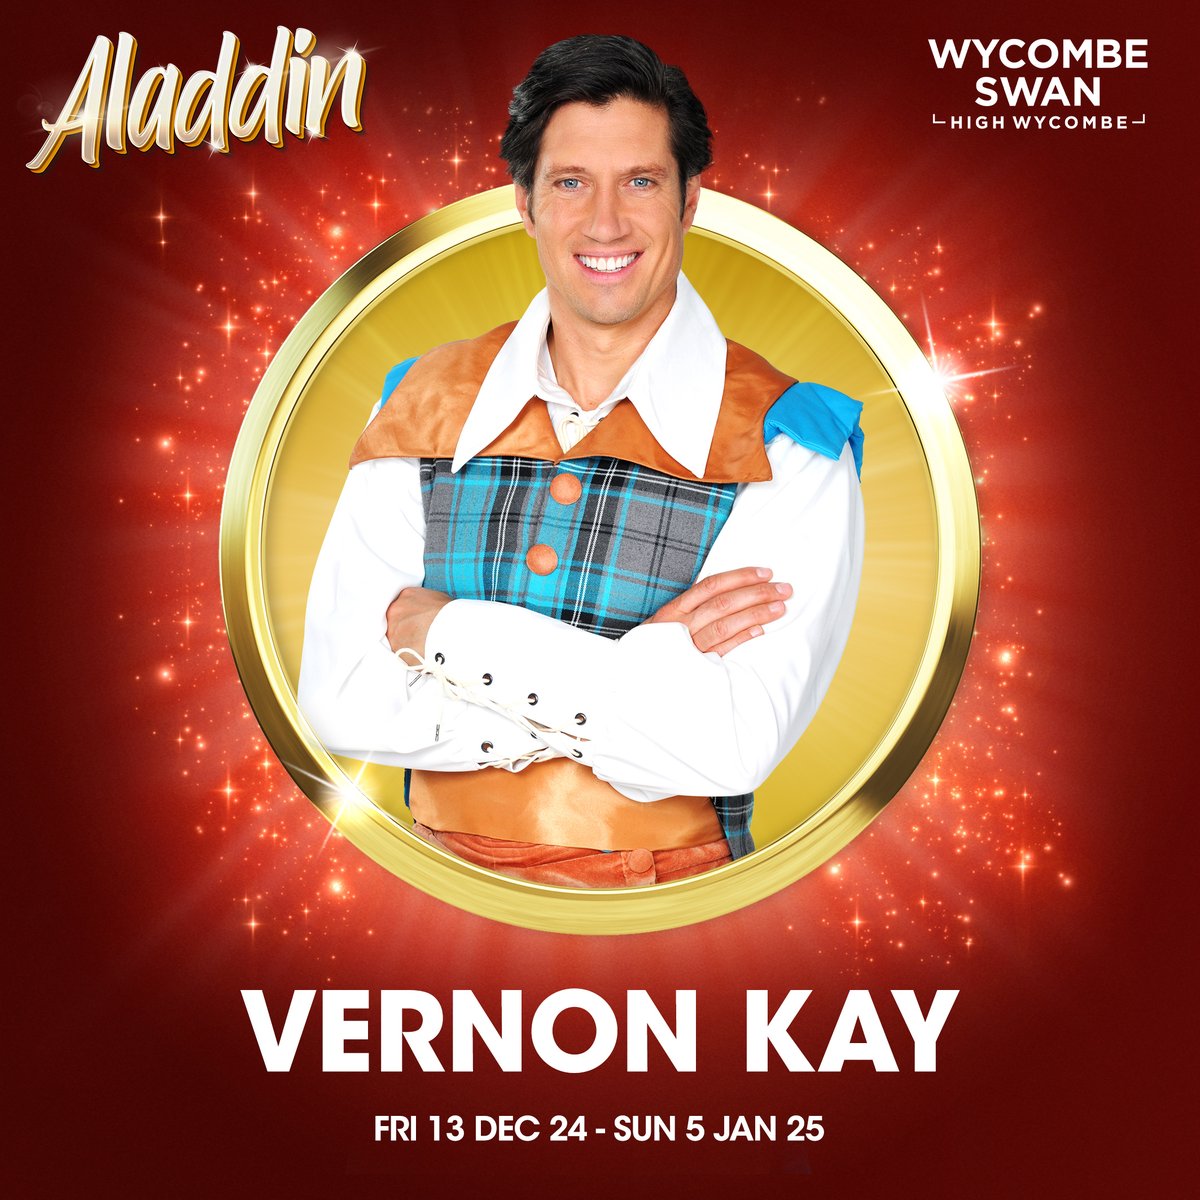 ✨BIG NEWS!! ✨
 
We are thrilled to announce that the one and only VERNON KAY will return to the Wycombe Swan to star in our spectacular pantomime, joining the previously announced, La Voix in Aladdin this December!
 
#wycombepanto #panto

🎟️  eu1.hubs.ly/H09c6070